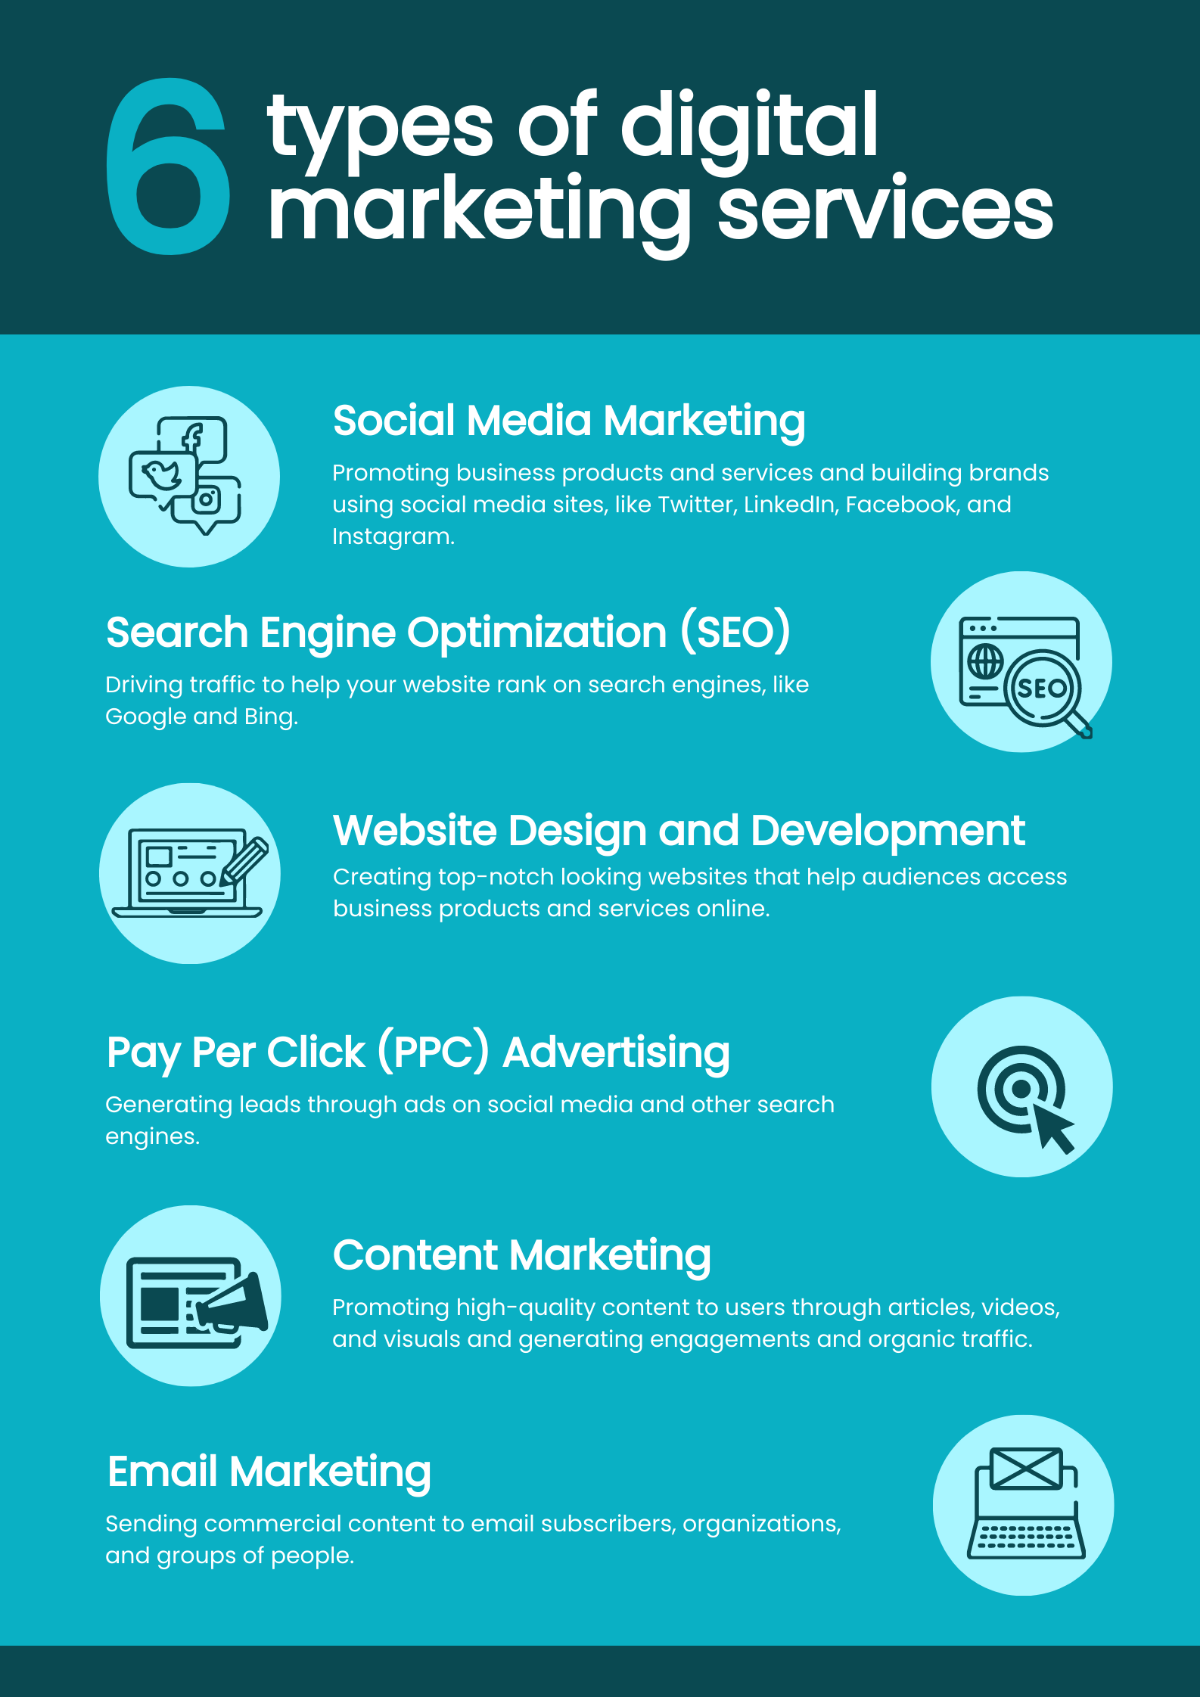 Free Digital Marketing Services Infographic Template